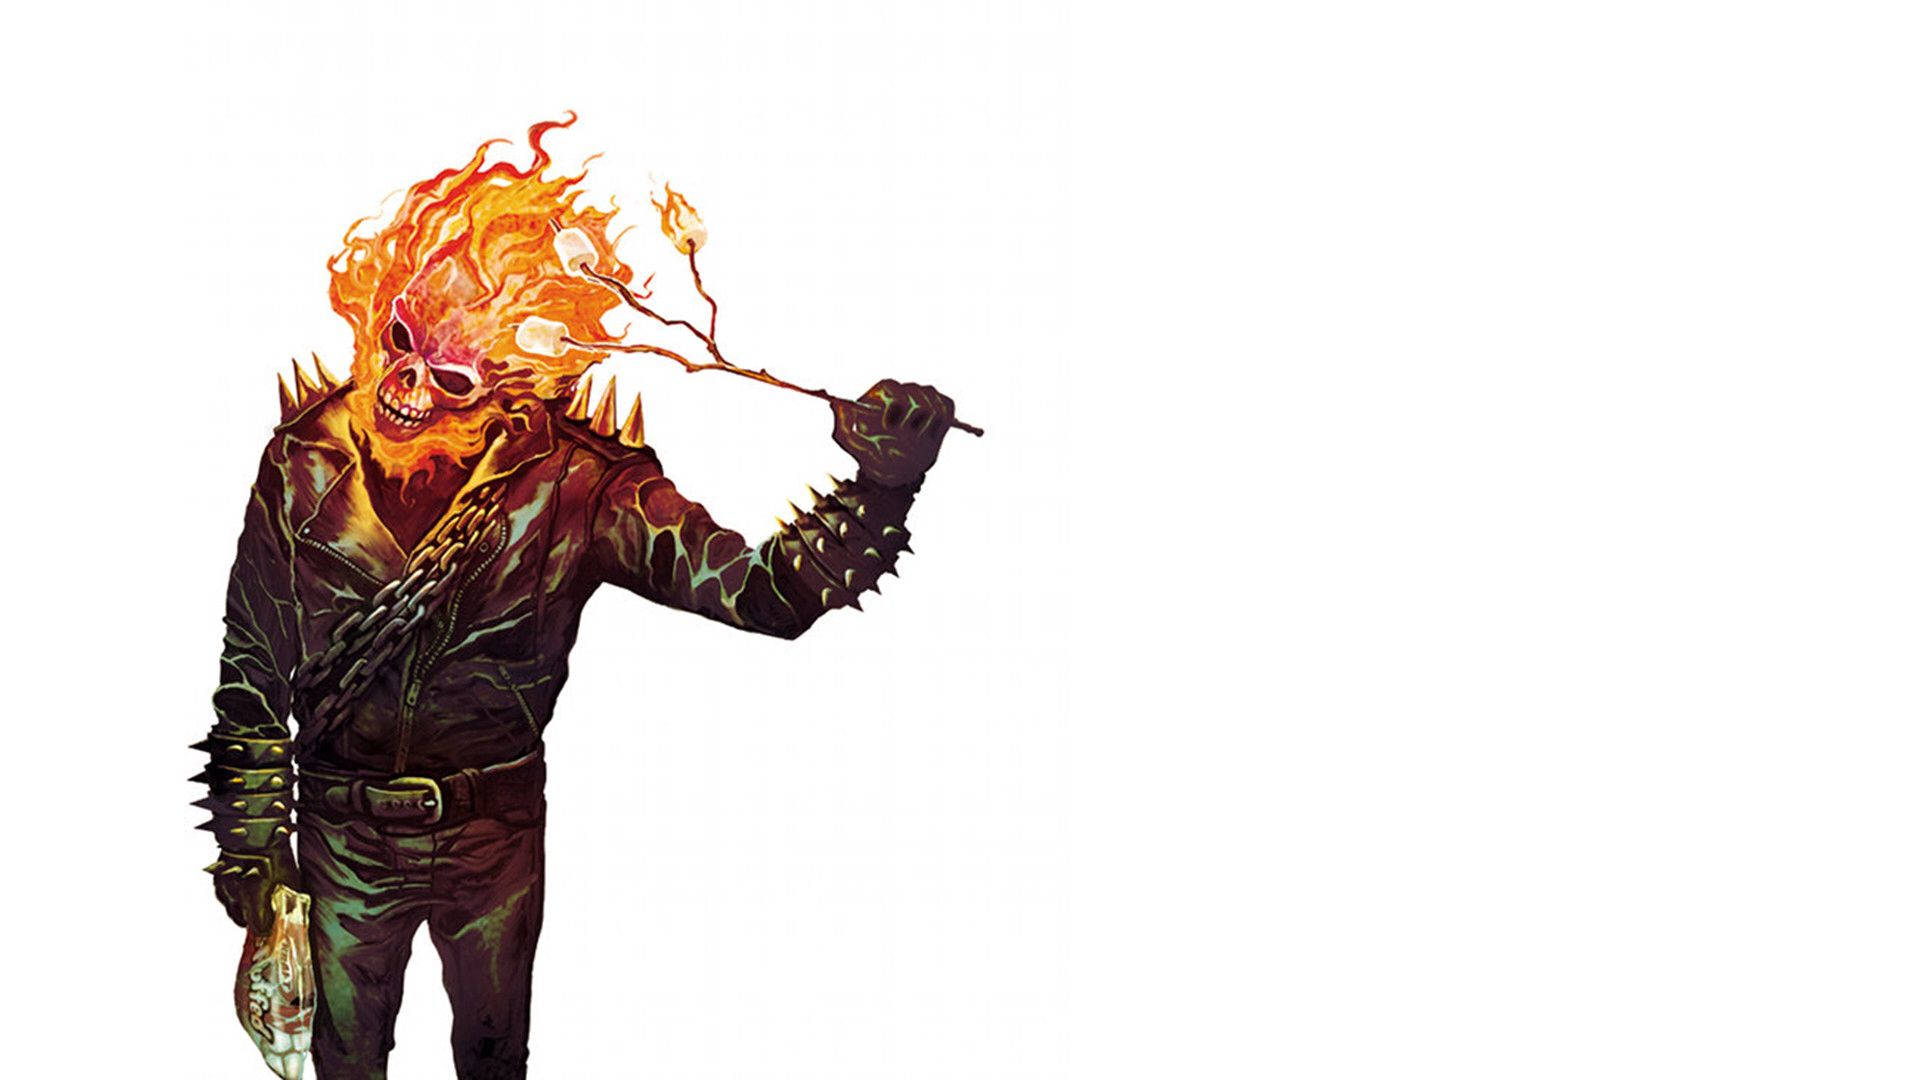 Marvel villain skeleton burning his own head with a stick of marshmallows.